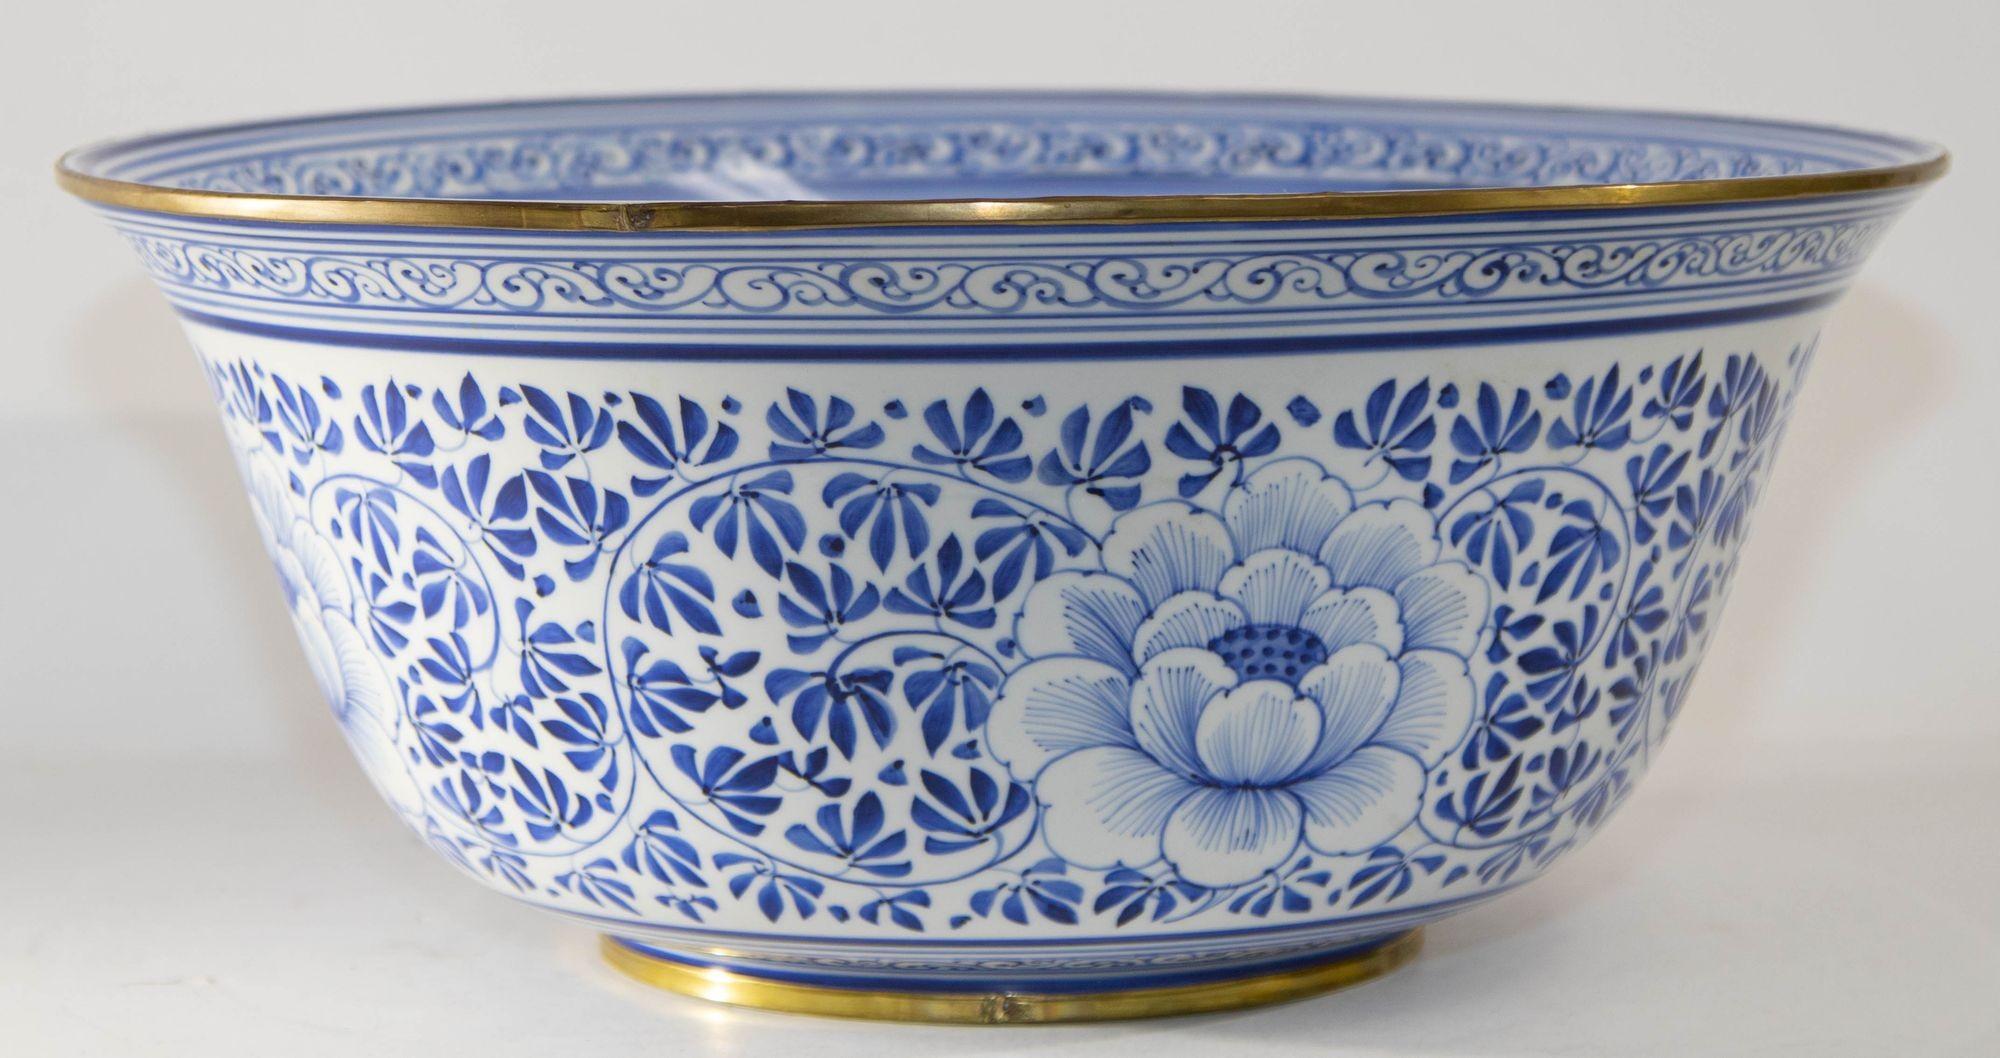 Vintage Maitland Smith large decorative blue and white porcelain bowl with brass rim.
Thai Hand-painted porcelain bowl with floral motifs, blue and white with brass rings running the circumference of the bottom and the top. Vintage Maitland Smith